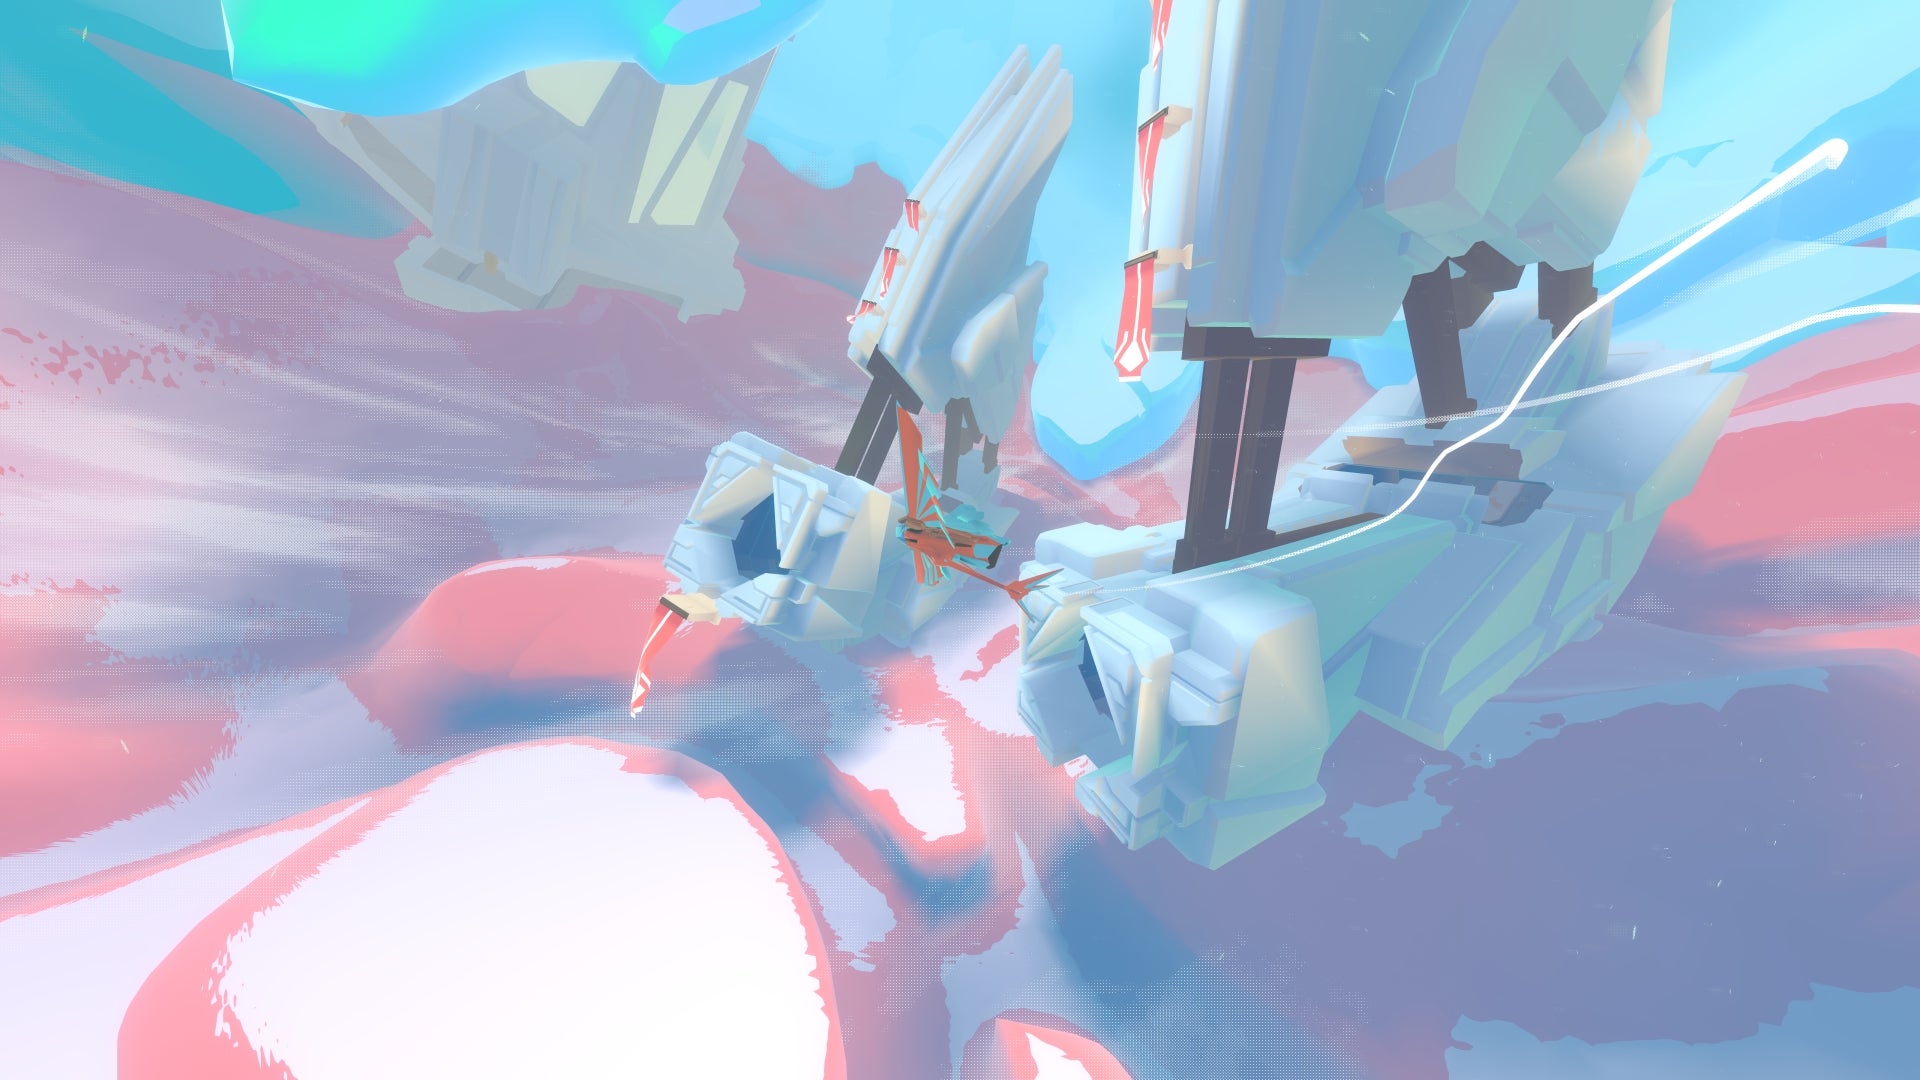 Screenshot of InnerSpace game with floating structures and vehicle.